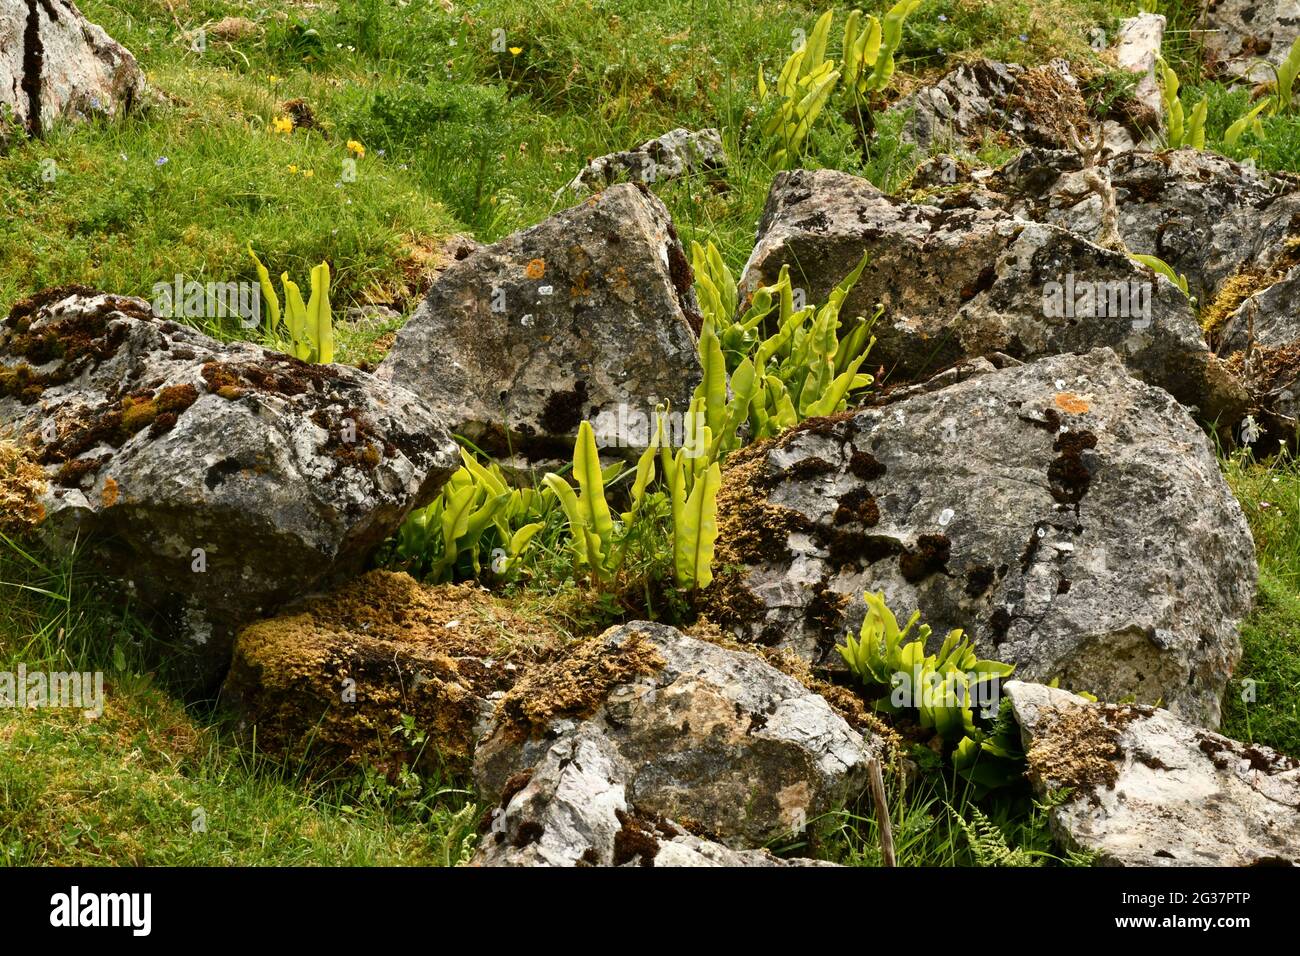 Hart's-tongue Fern,' Asplenium scolopendrium' among lichen and moss covered limestone rocks in worked out mineral veins or ‘rakes' in Ubley Warren on Stock Photo